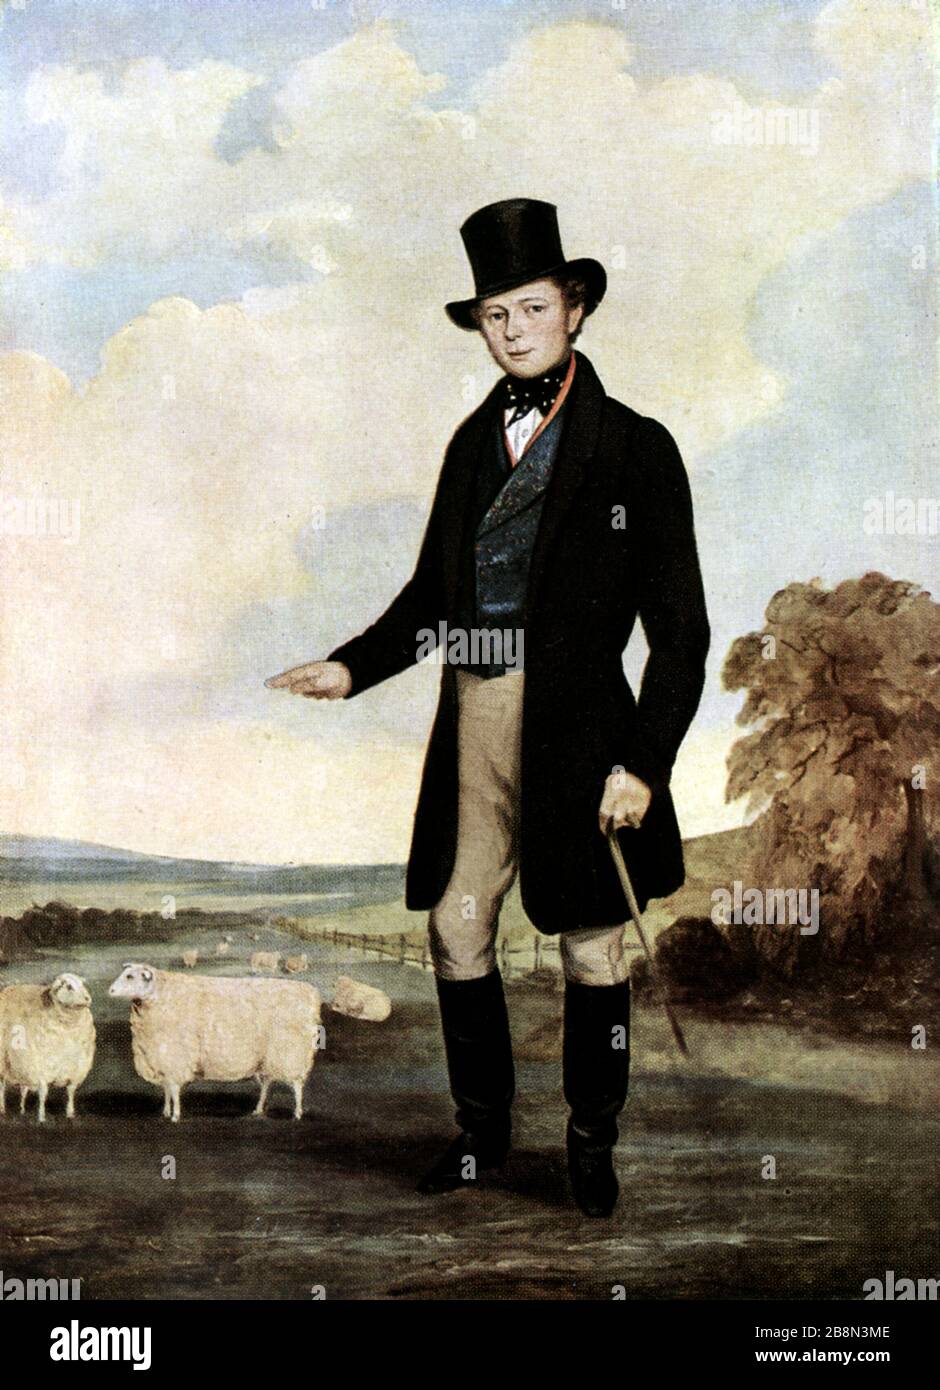 Mr Pawlett with his Leicester Sheep, 19th century. Winners at the first Royal Show, 1839. The Royal Show was an annual agricultural show held by the Royal Agricultural Society of England every year from 1839 to 2009. Stock Photo